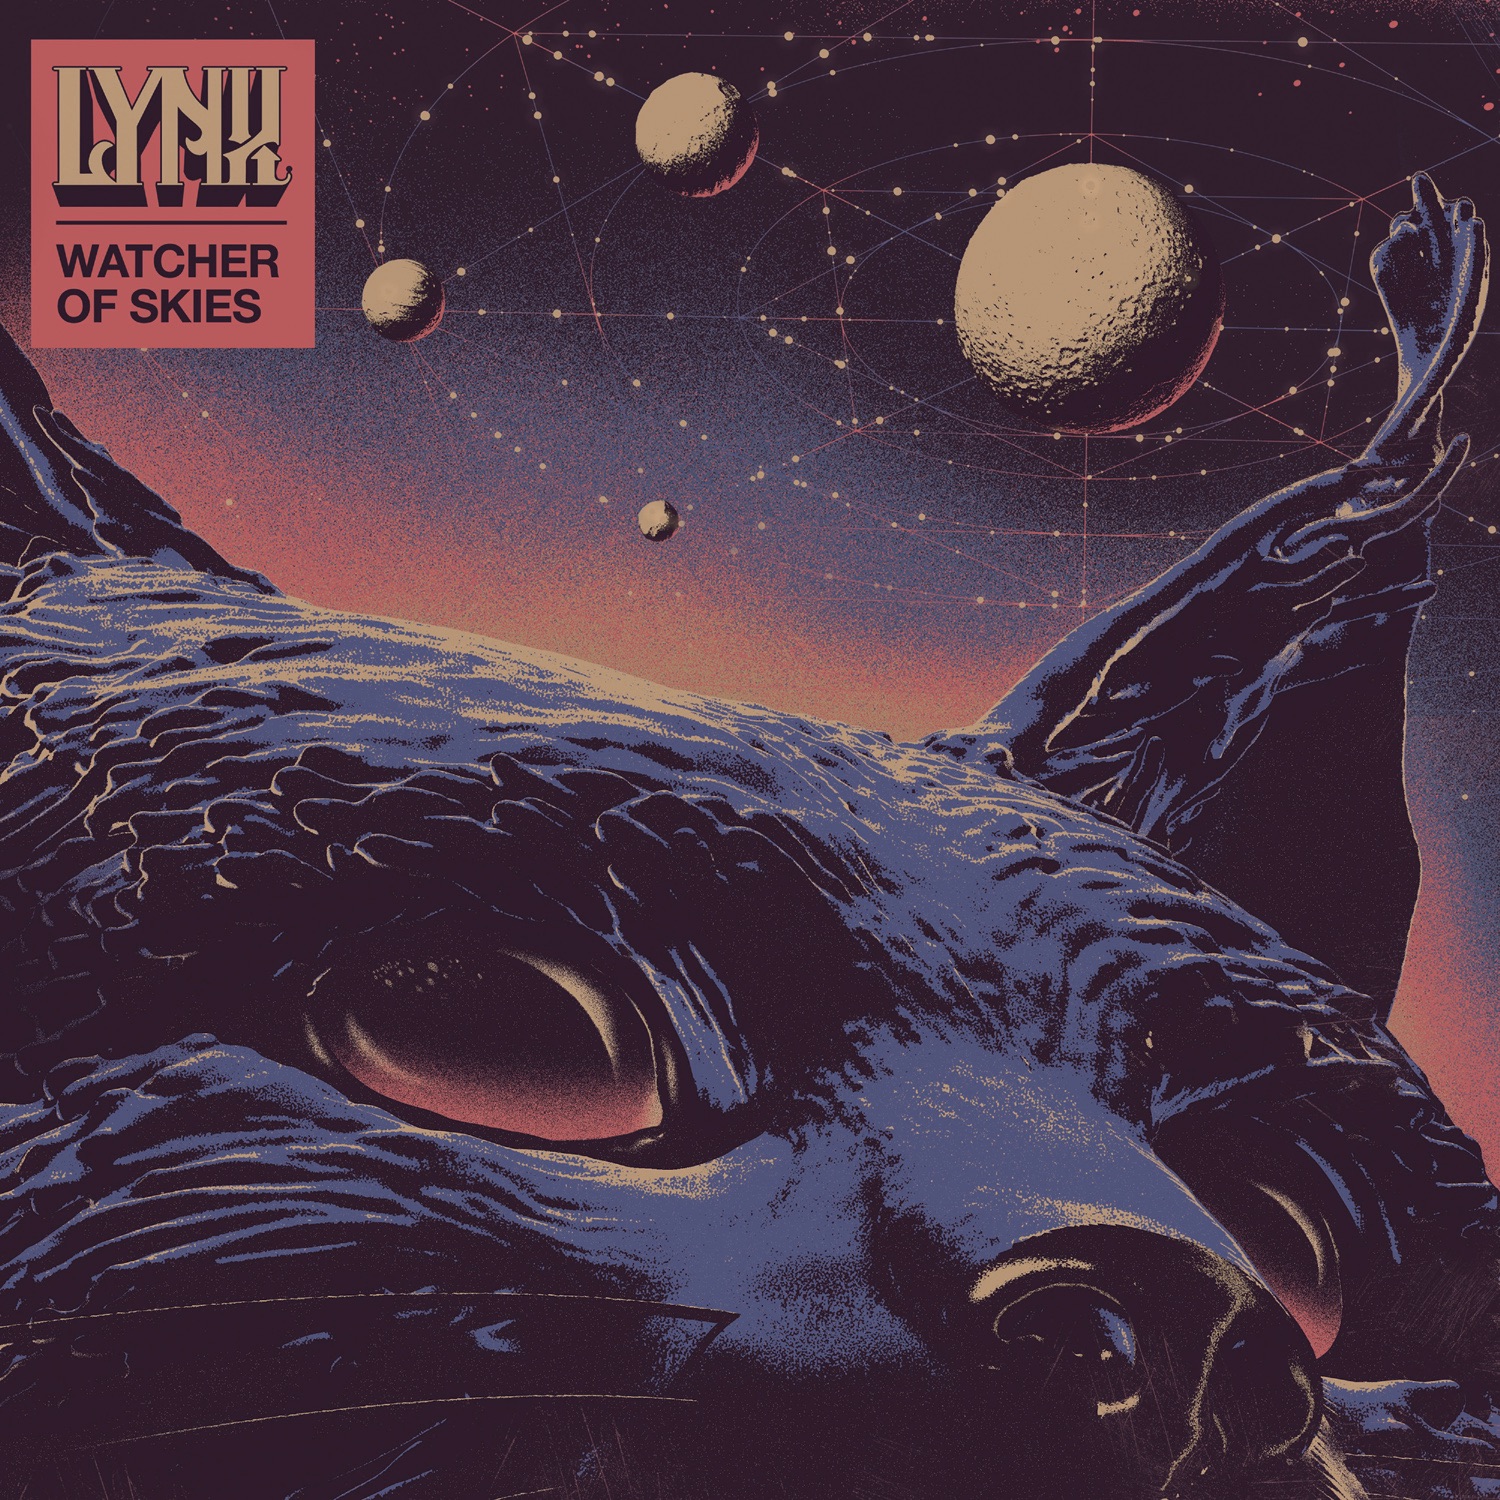 Lynx – Watcher of Skies Review